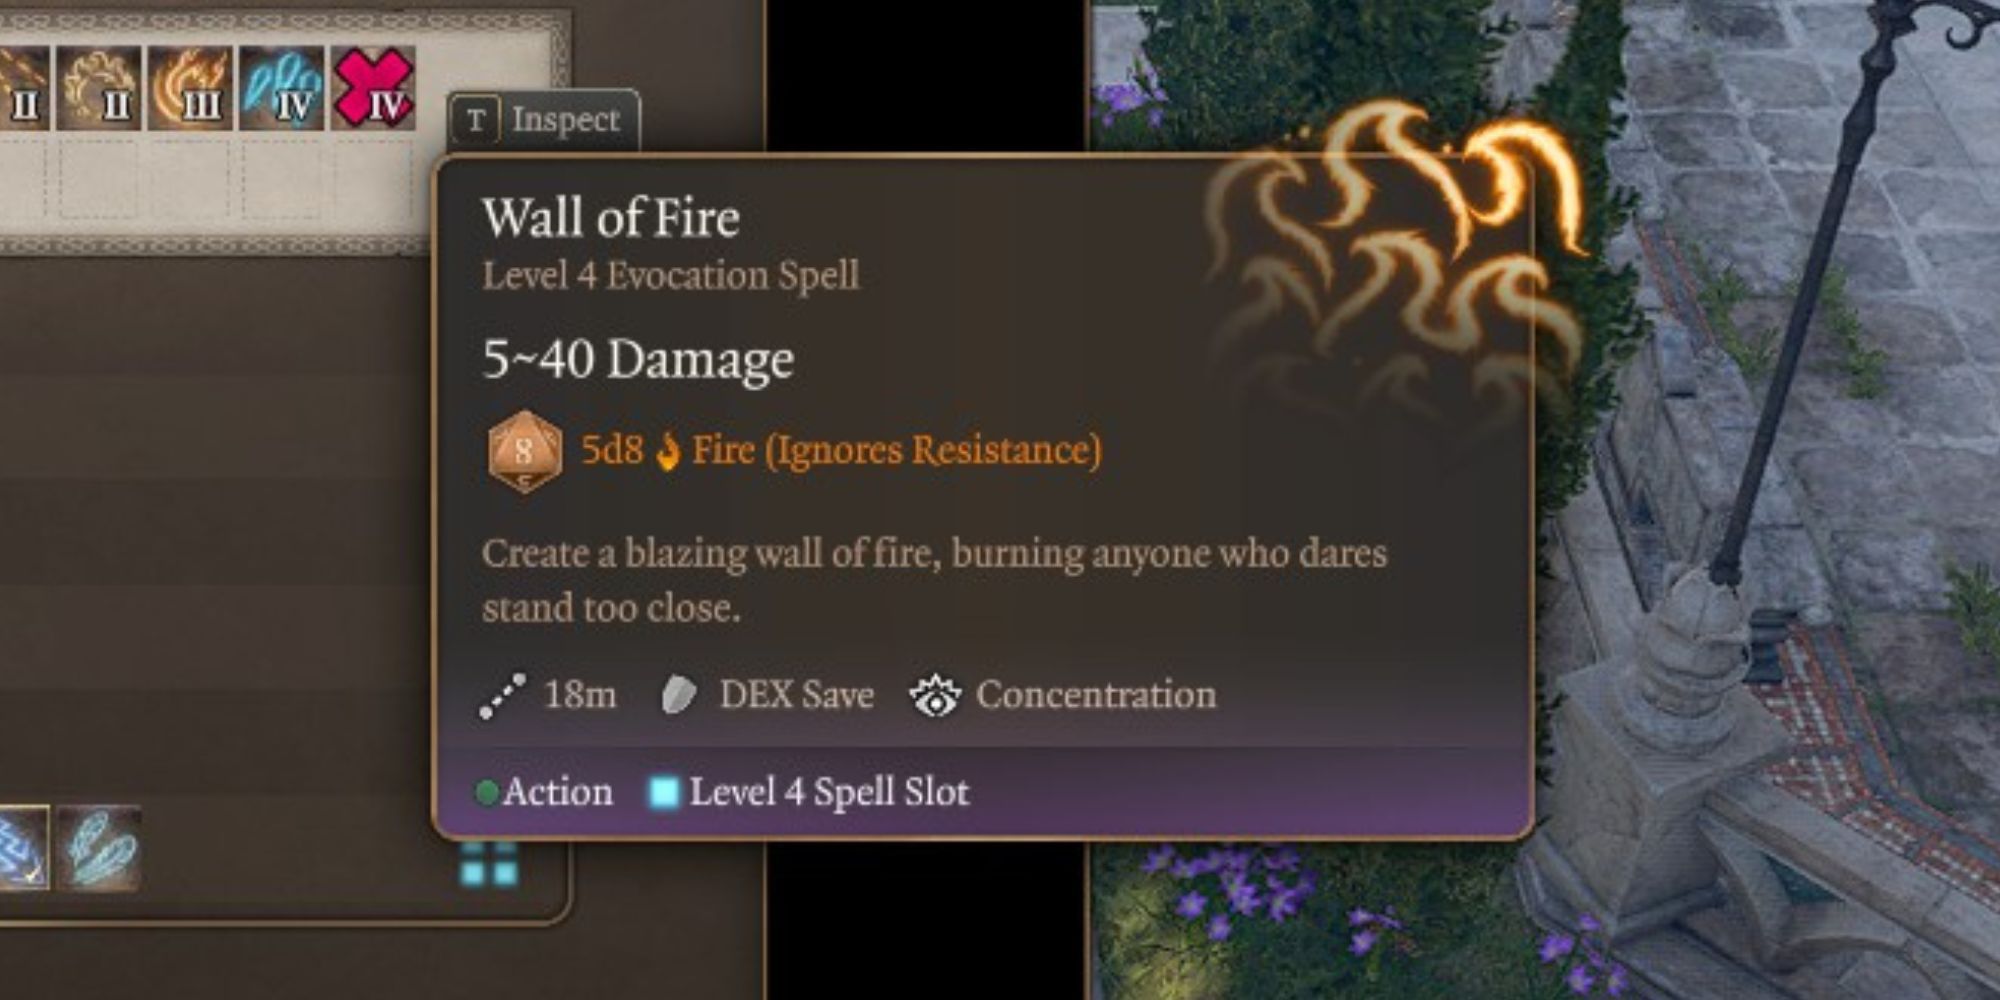 The Wall of Fire spell in Baldur's Gate 3